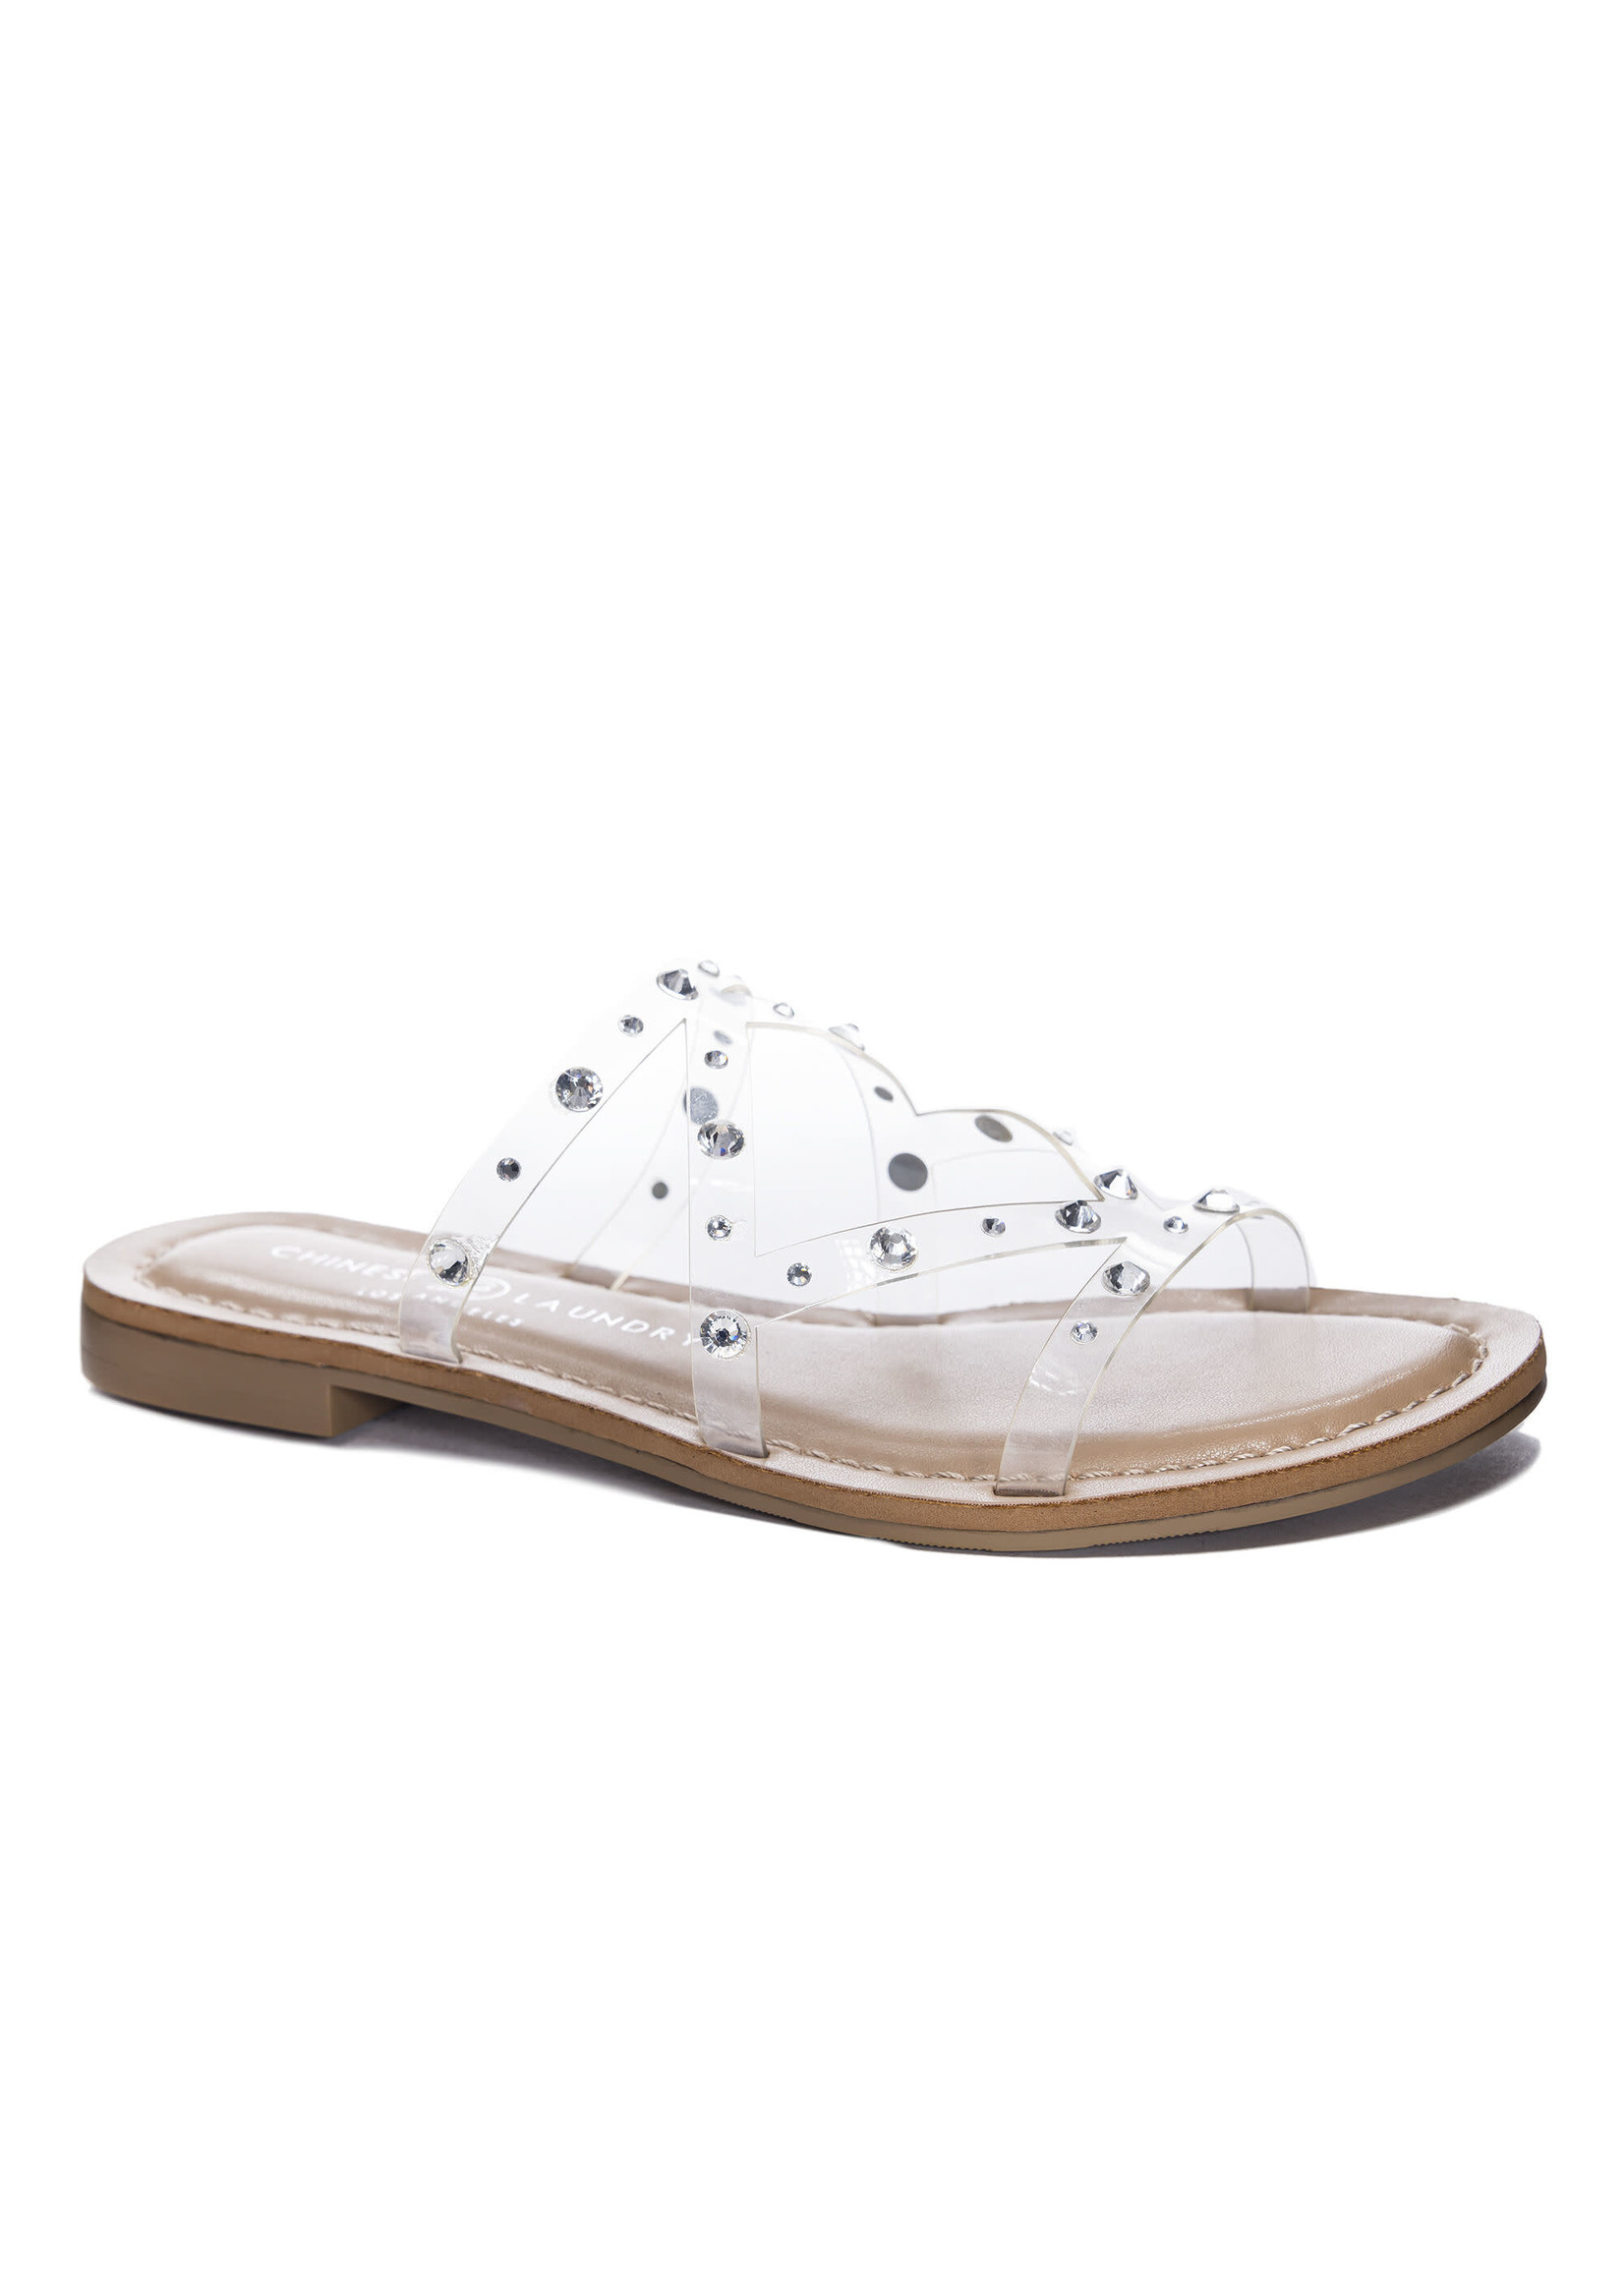 Chinese Laundry Coralie Clear Vinyl Sandal by Chinese Laundry  Final Sale